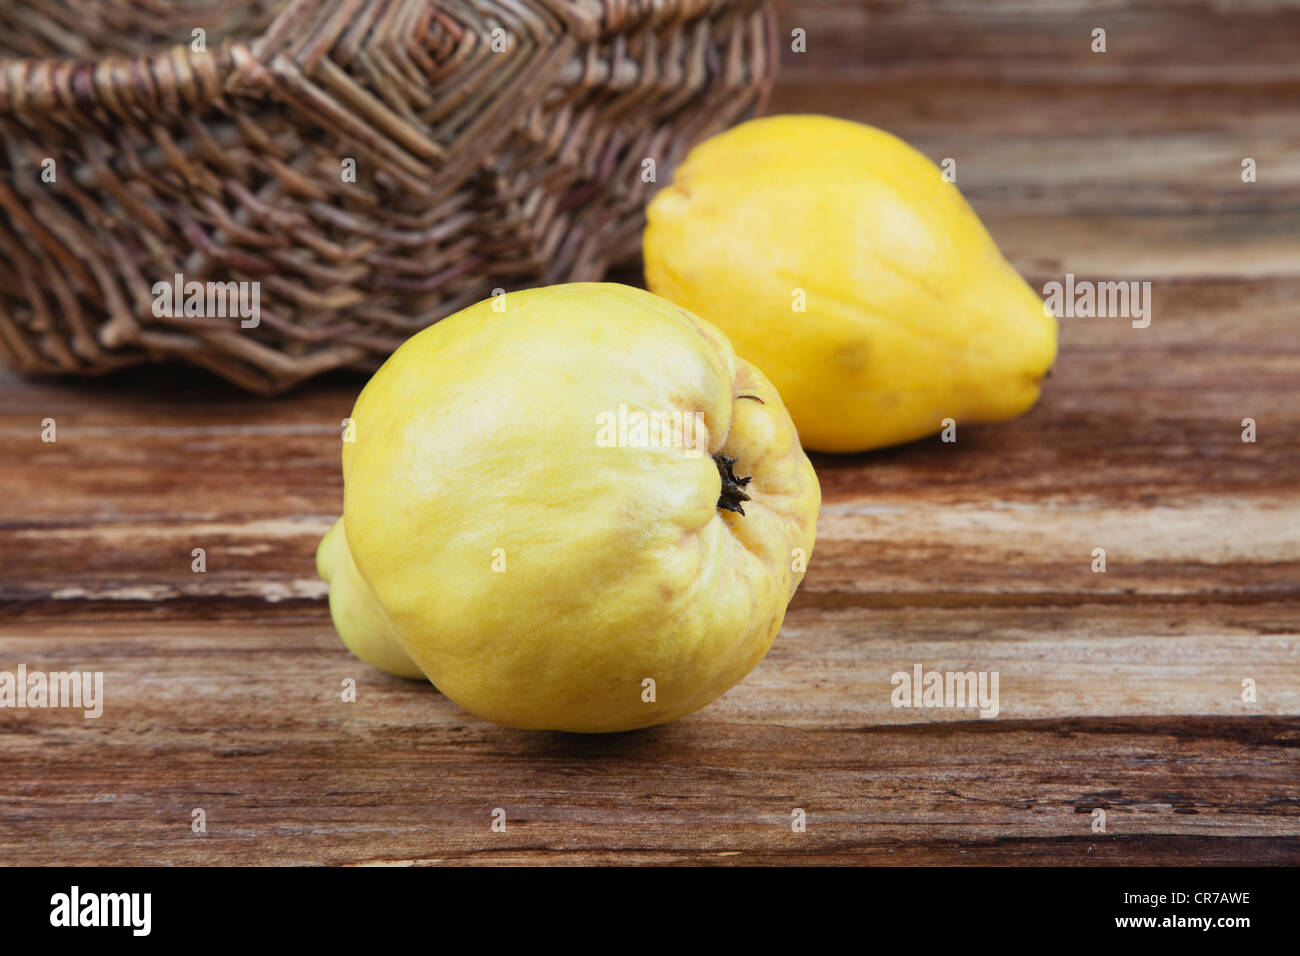 Quince on wooden table, close up Stock Photo